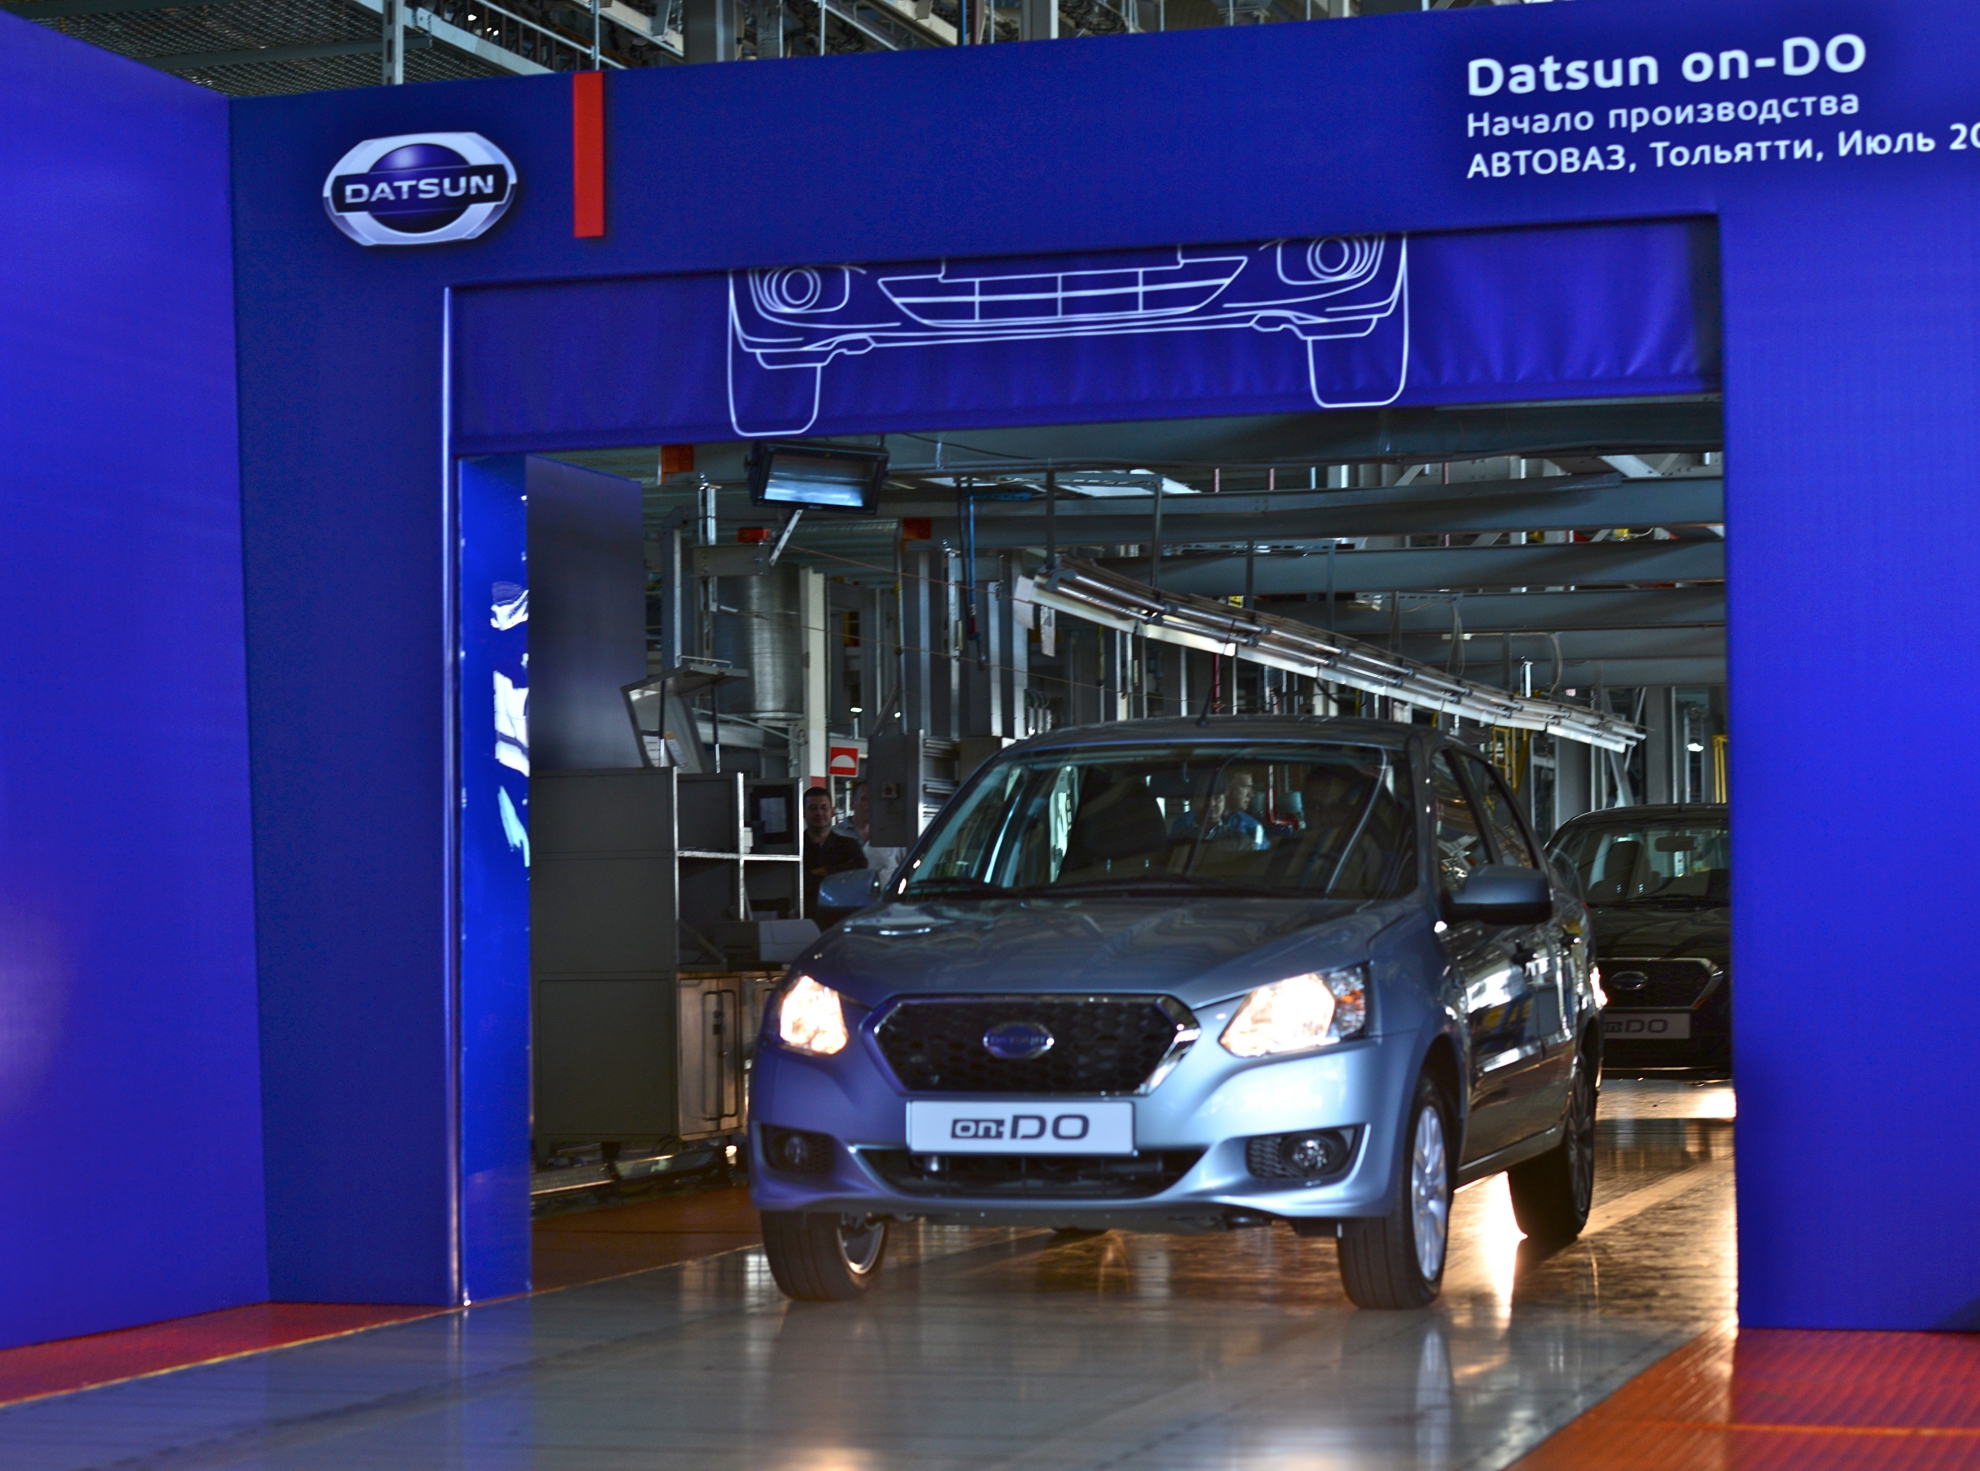 DATSUN PREPARES FOR ITS FIRST APPEARANCE AT MOSCOW INTERNATIONAL AUTOSALON